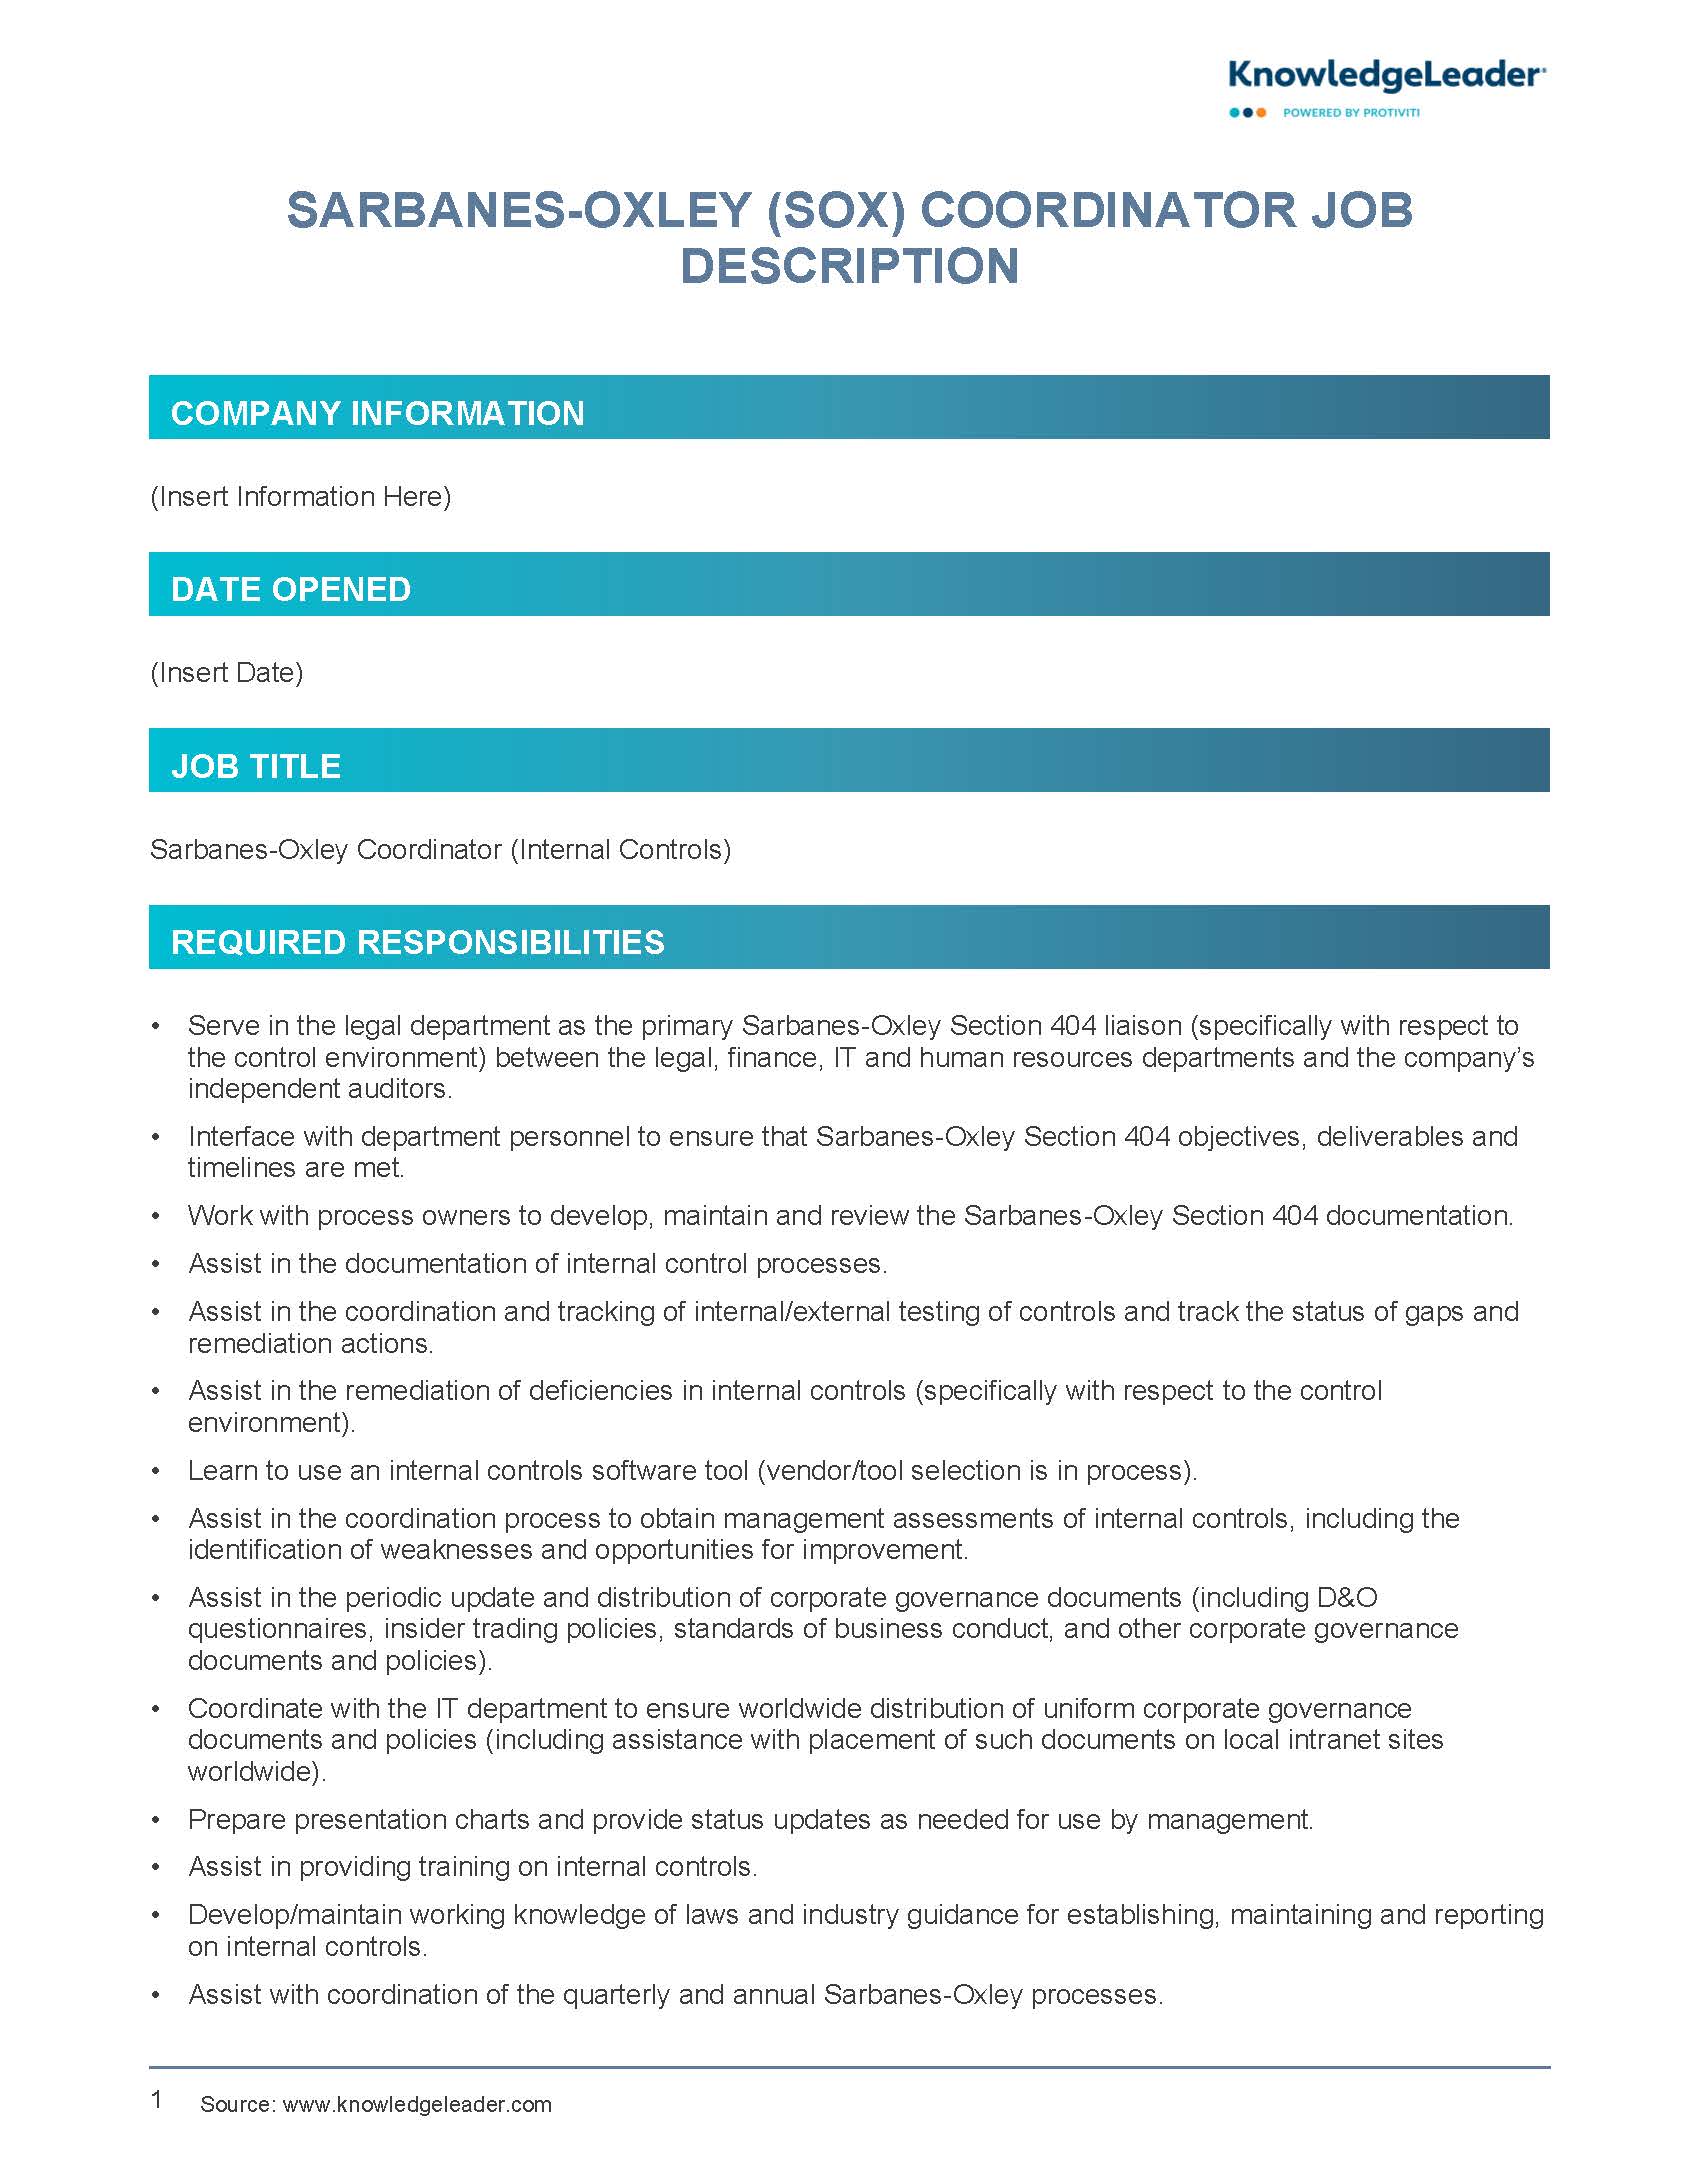 Screenshot of the first page of Sarbanes-Oxley (SOX) Coordinator Job Description